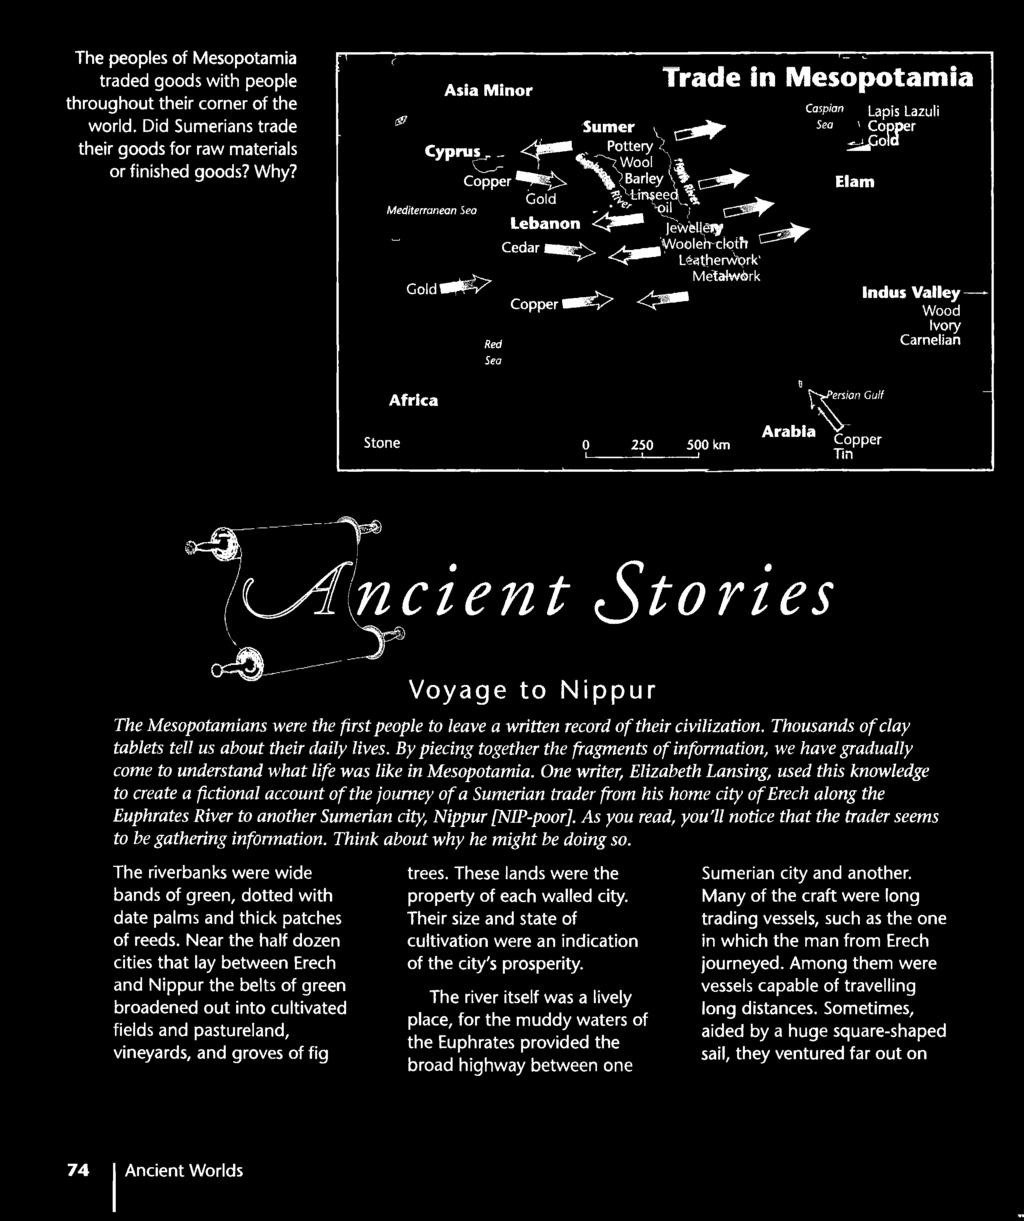 One writer, Elizabeth Lansing, used this knowledge to create a fictional account ofthe journey ofa Sumerian trader from his home city oferech along the Euphrates River to another Sumerian city,